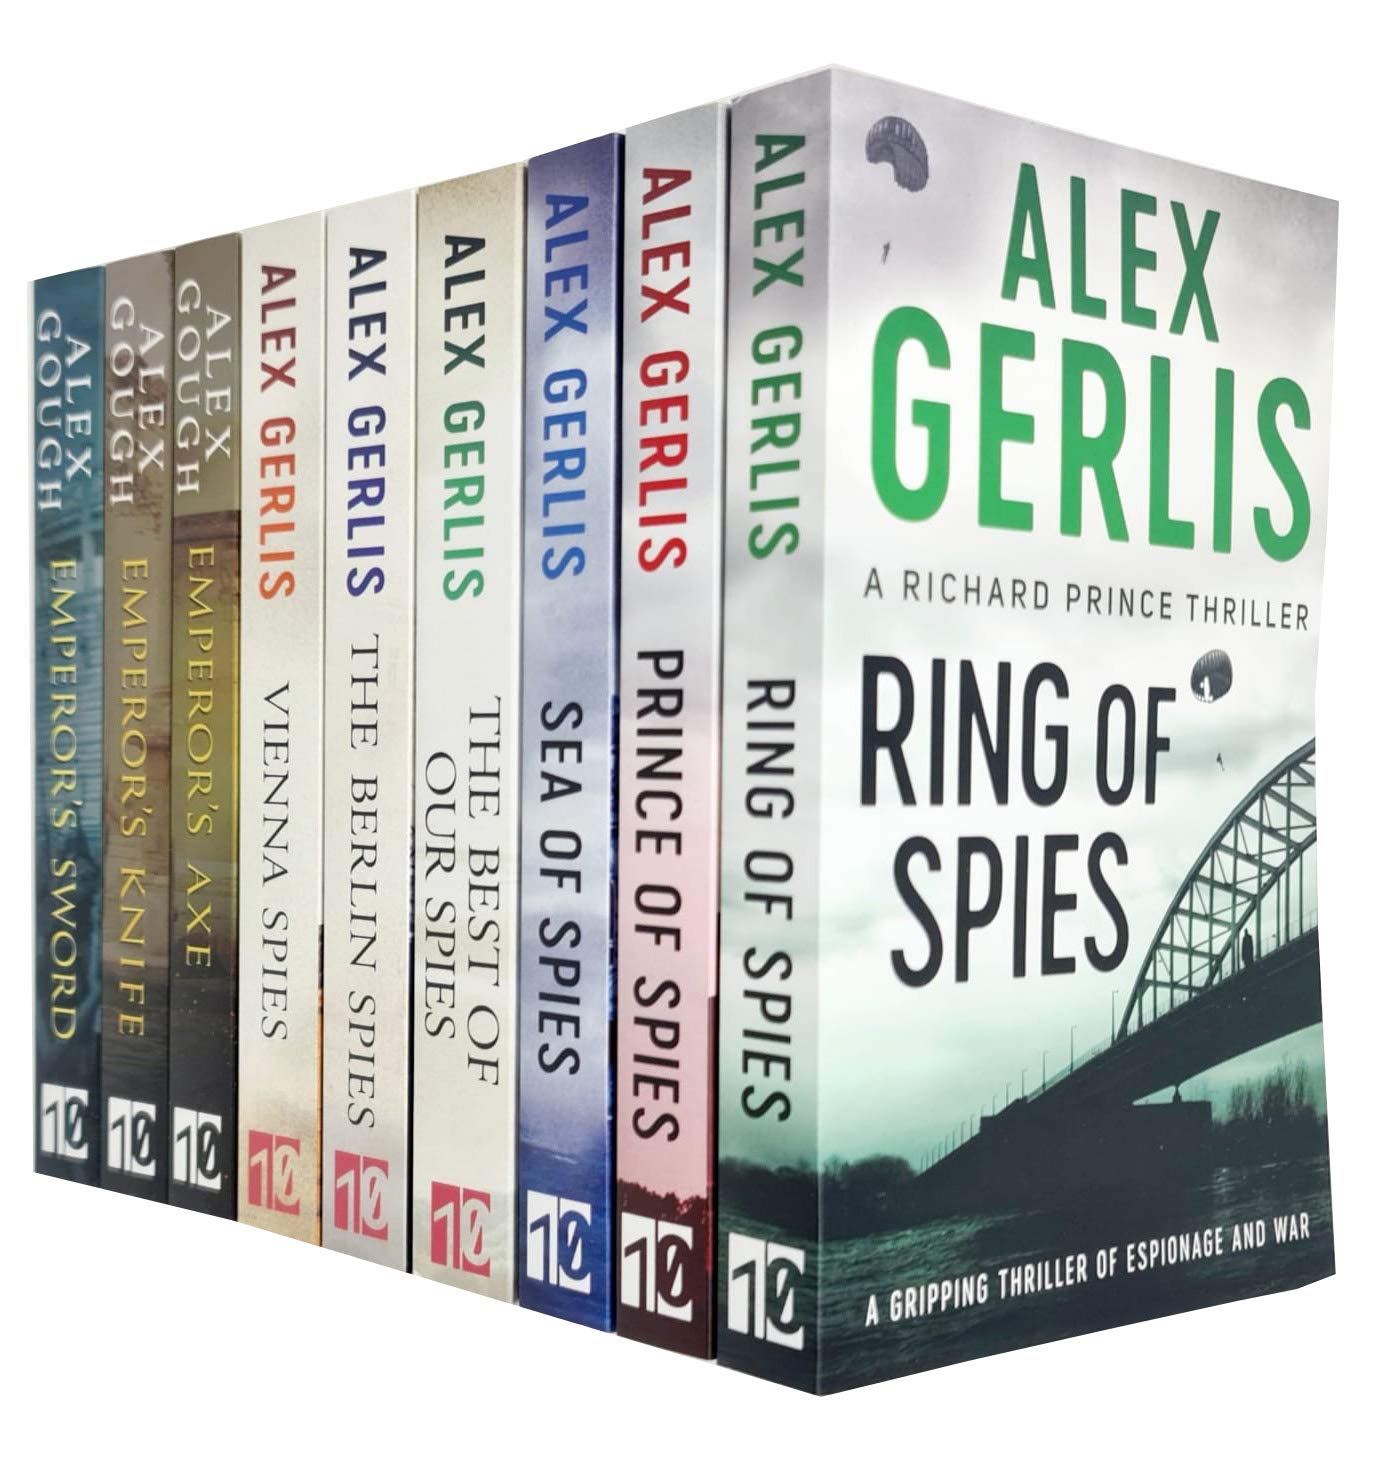 Alex Gerlis 9 Books Collection Set (Ring of Spies, Sea of Spies, Prince of Spies, Vienna Spies) - Lets Buy Books